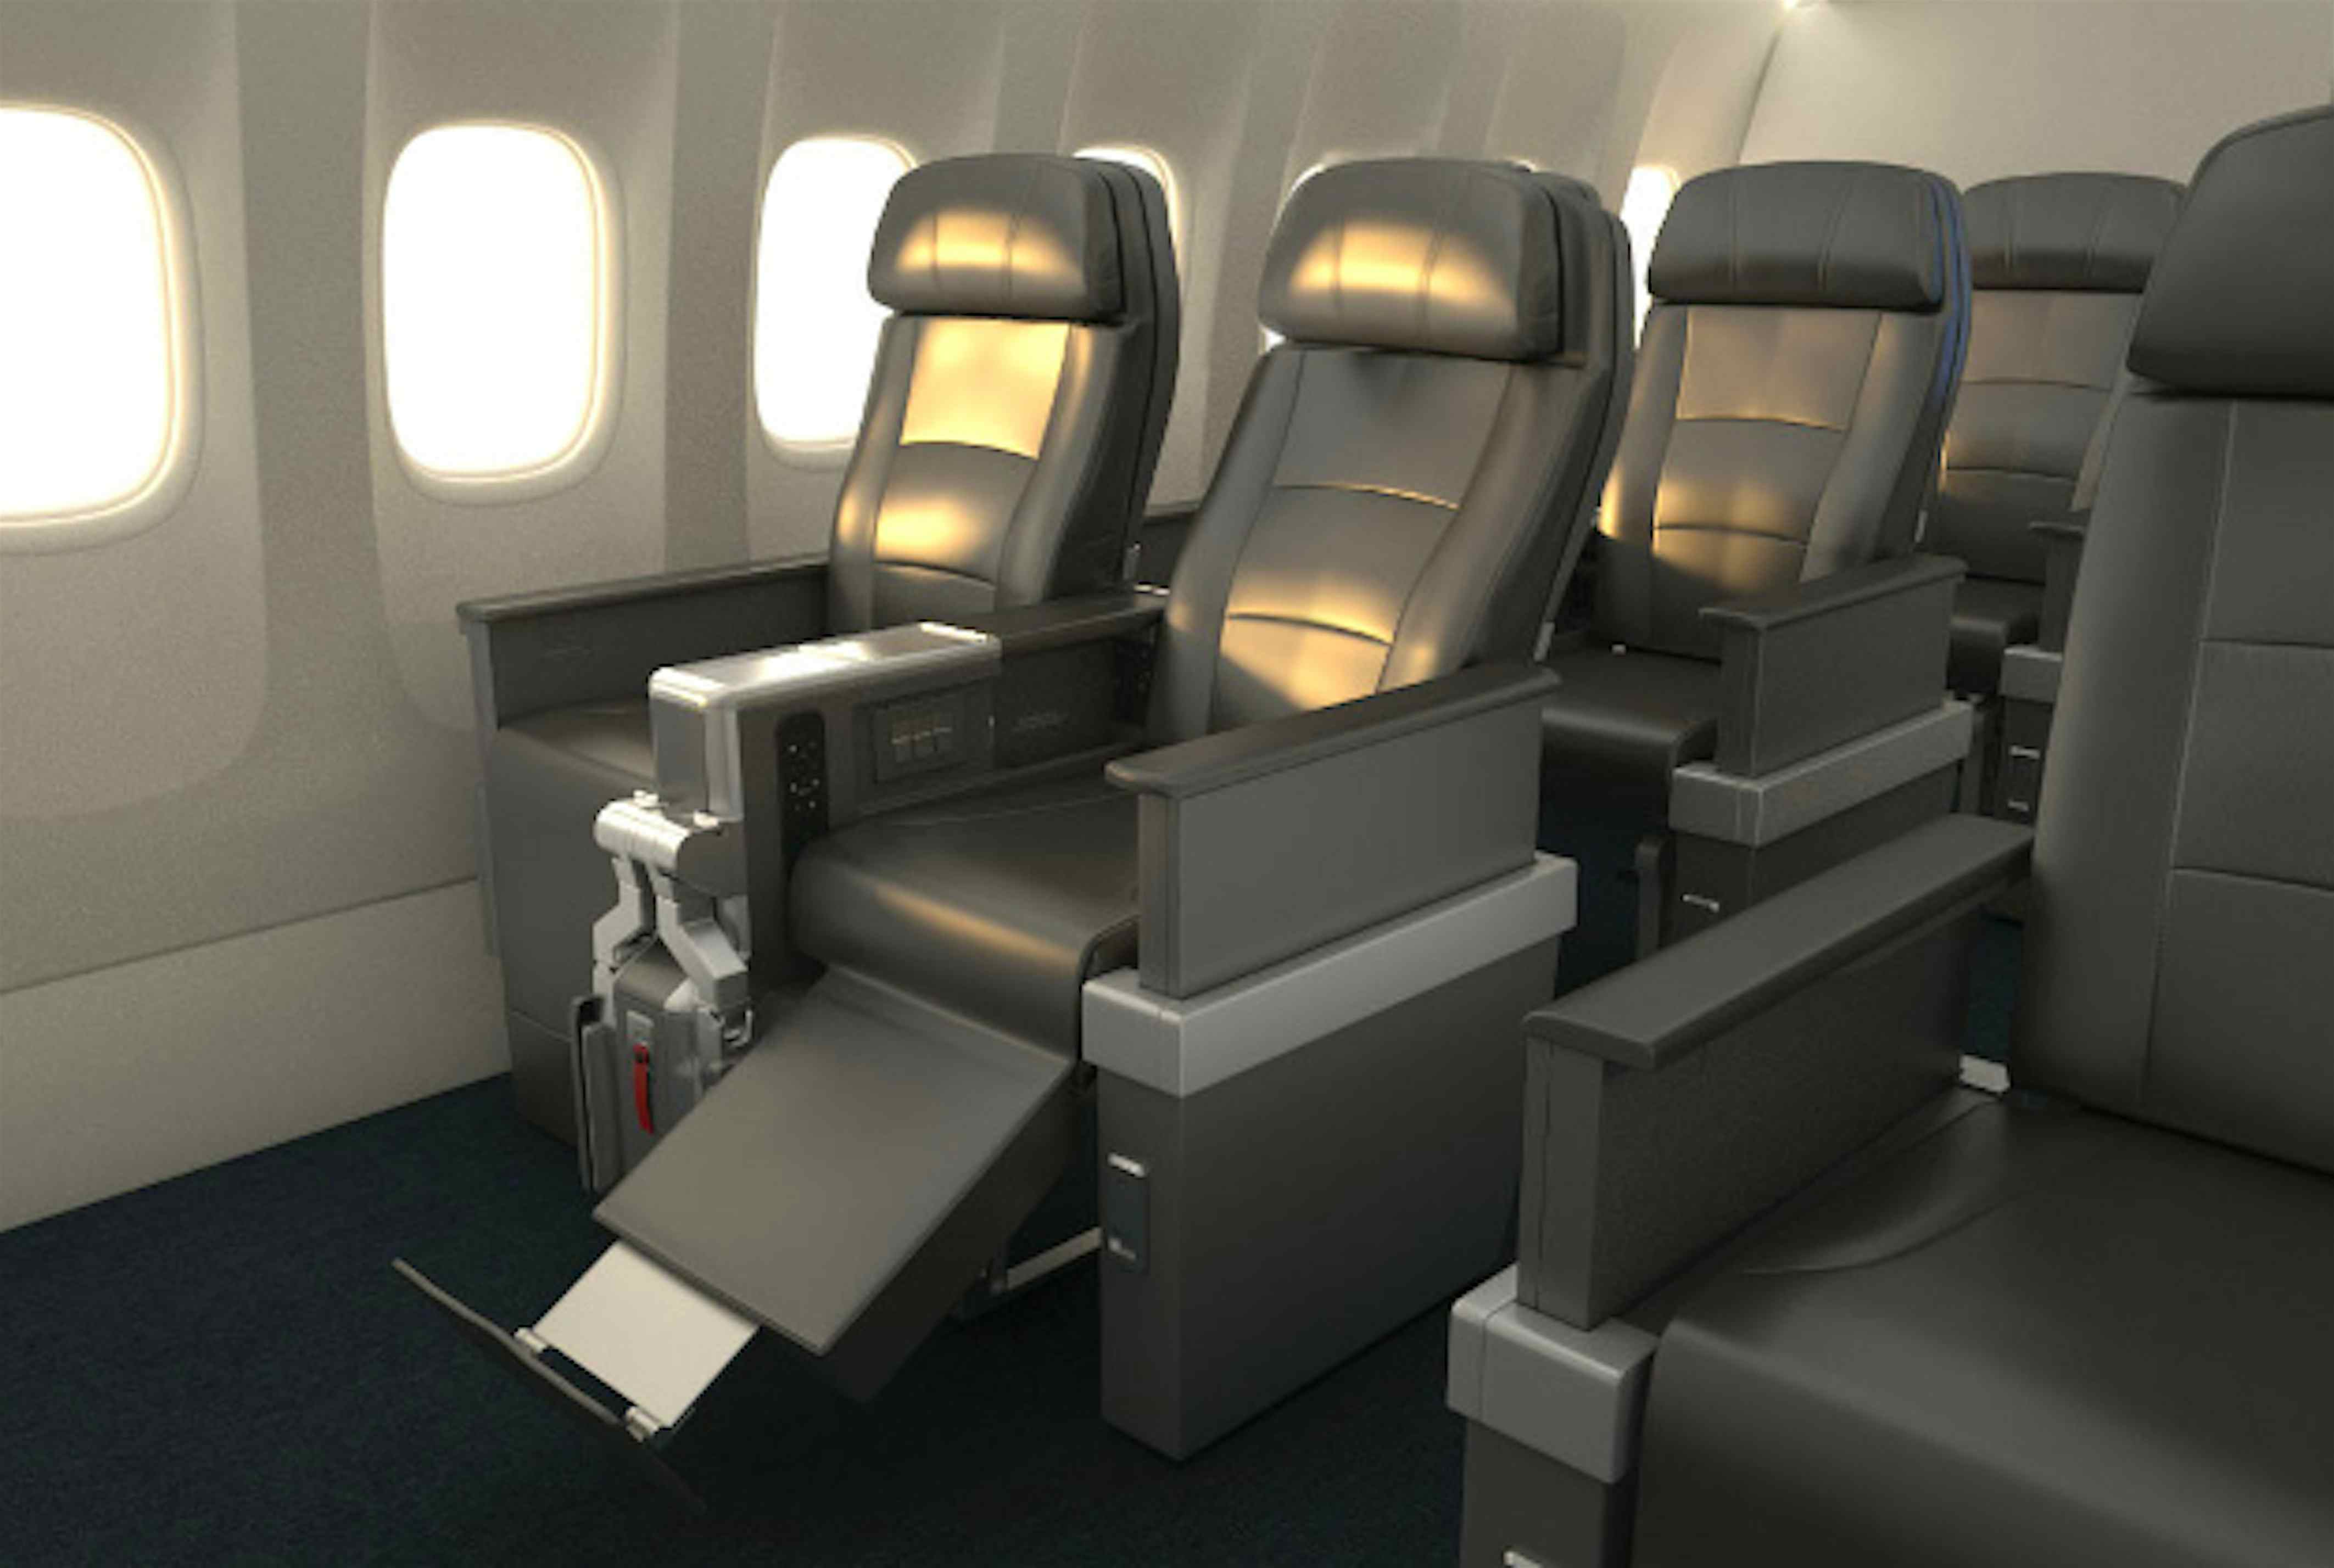 New 'premium' economy class on American Airlines Lonely